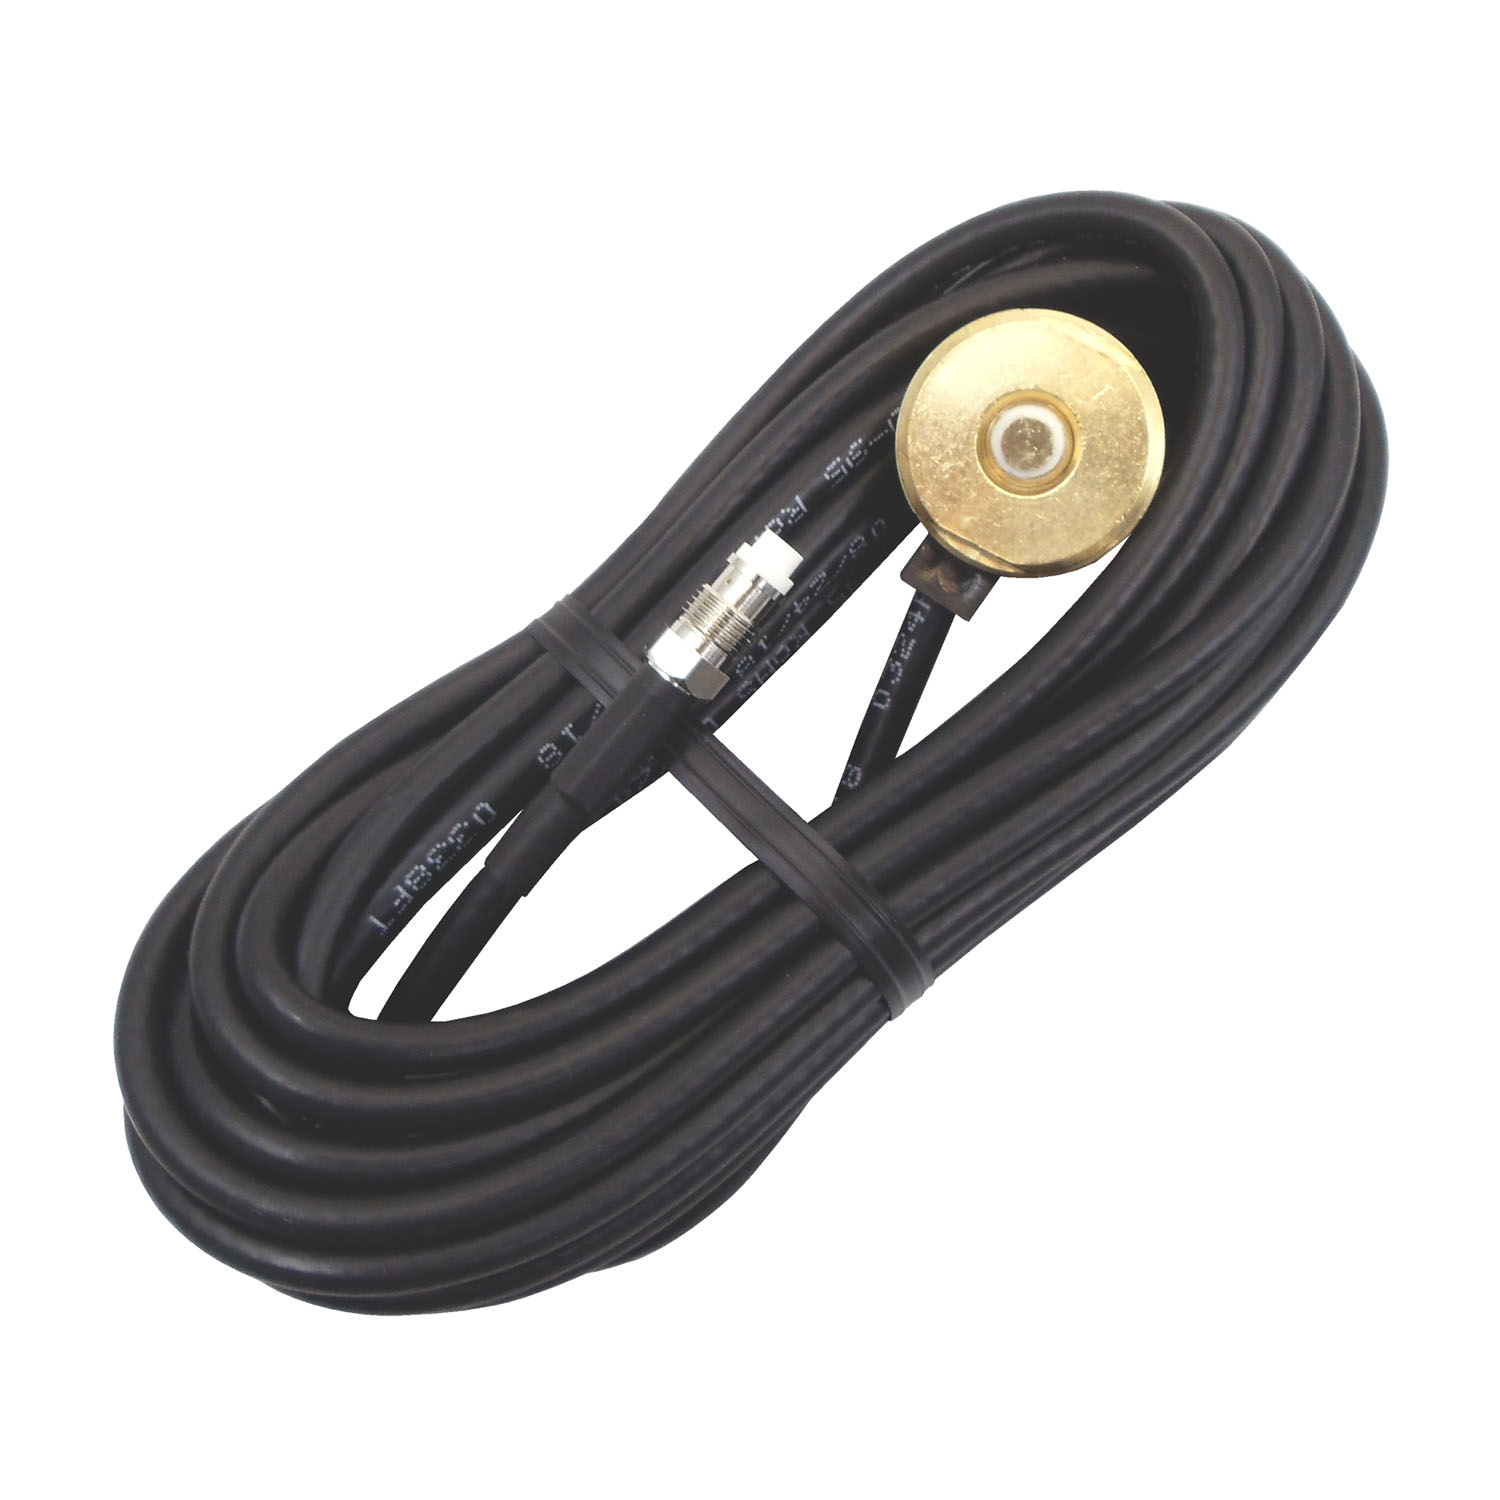 Procomm - MSM38S-17NIP Nmo Brass Surface Mount For 3/4" Base Load Antennas, Includes 17' Coax Cable & Fme Connector